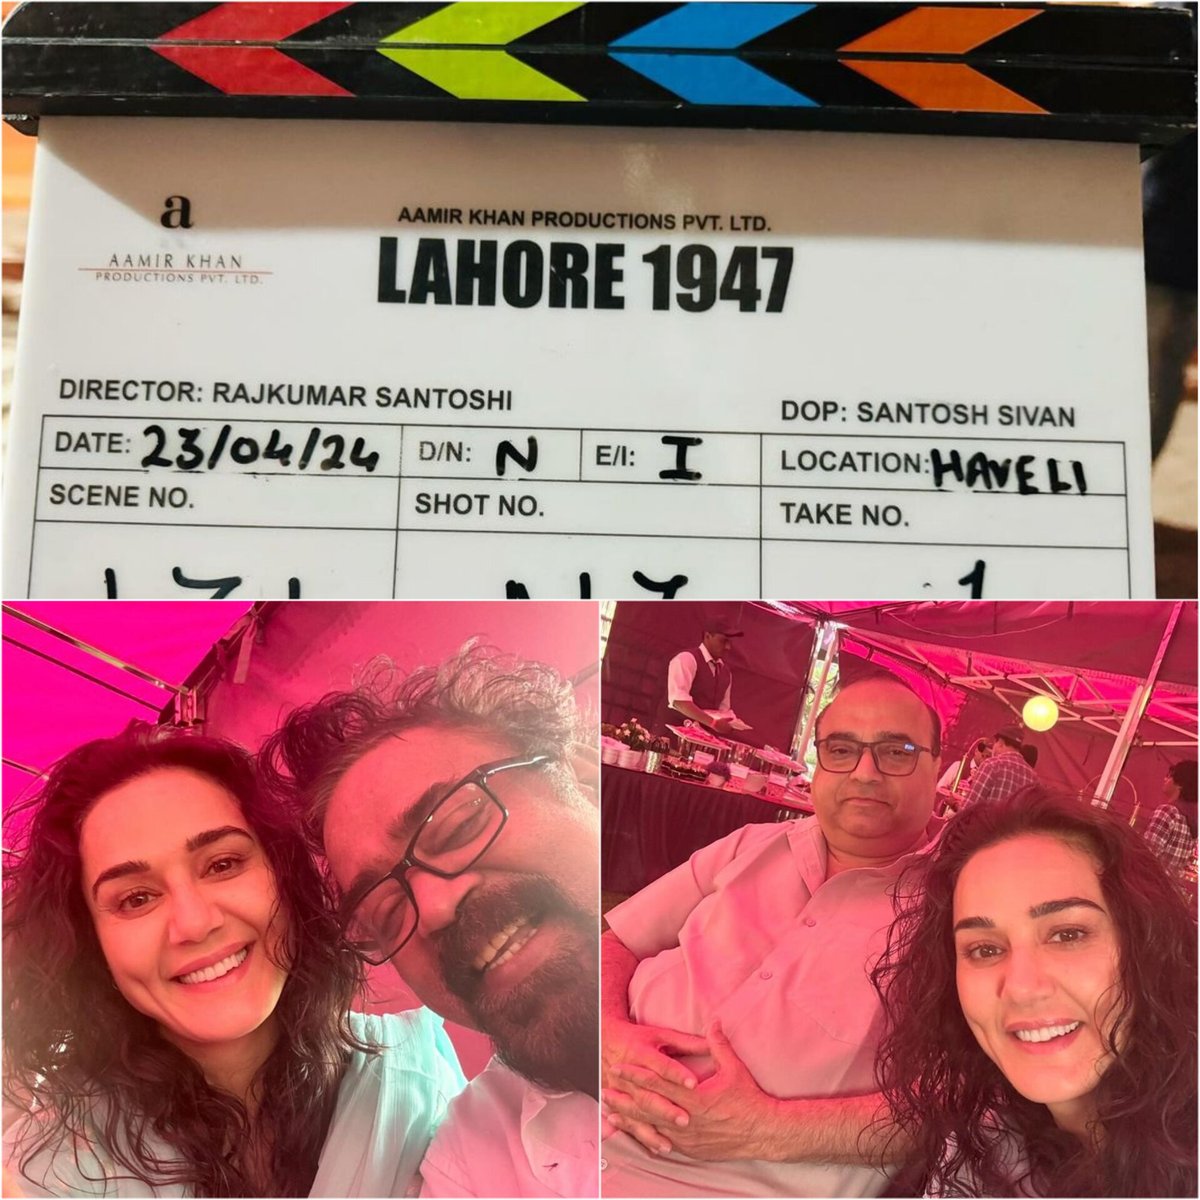 Exciting news! Preity Zinta makes a Bollywood comeback in 'Lahore 1947' alongside Sunny Deol. Fans thrilled for her return to the silver screen.

Read more on shorts91.com/category/enter…

#PreityZinta #BollywoodComeback #Lahore1947  #SunnyDeol